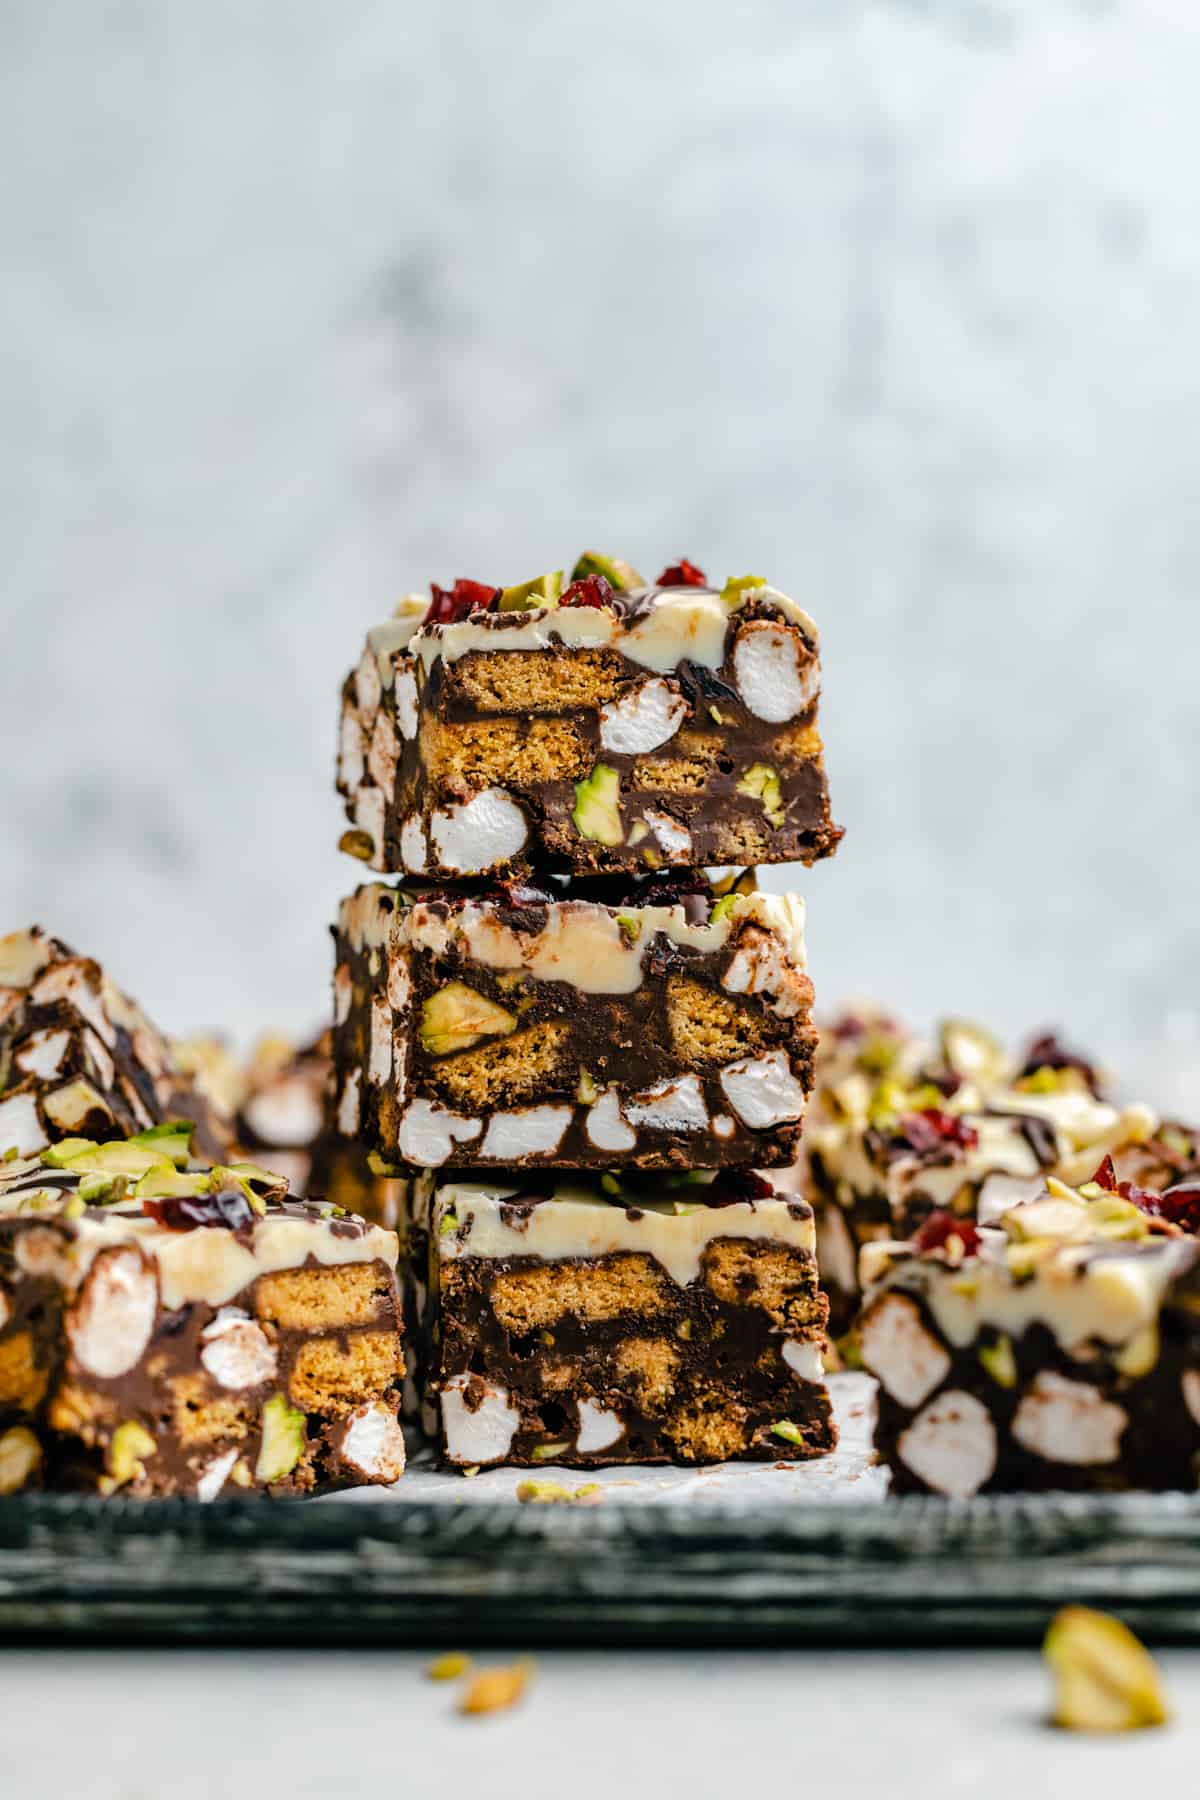 A stack of rocky road on a tray surrounded by other slices. You can see layers of marshmallow, chocolate and biscuit.